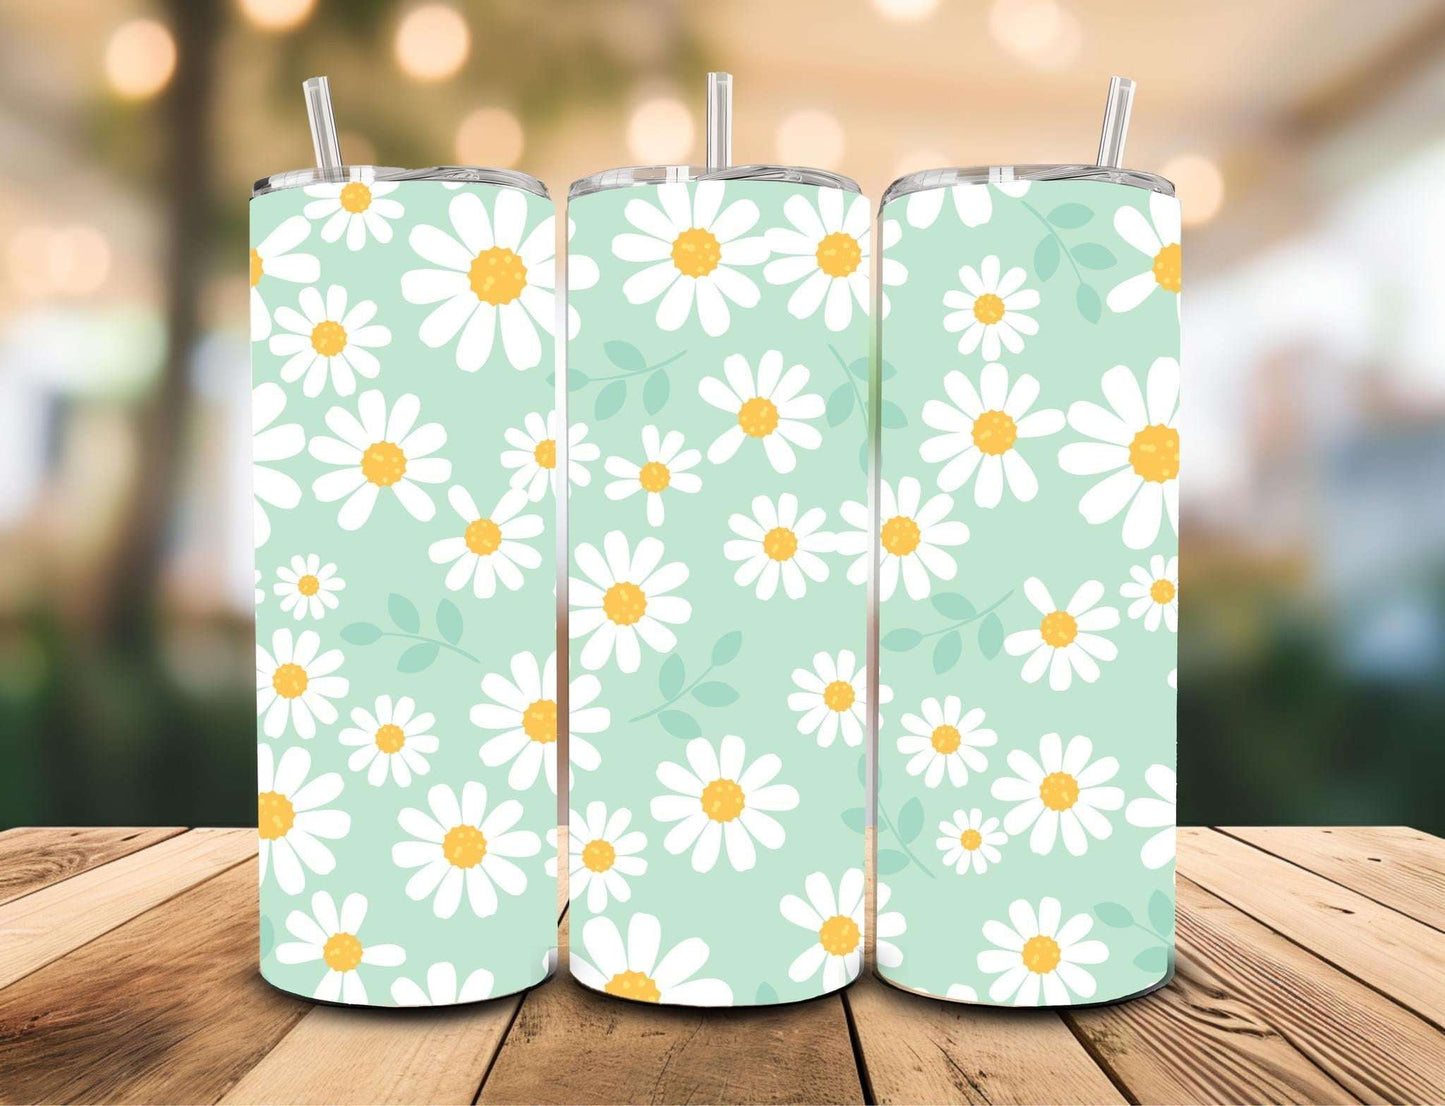 Elevate Your Hydration: 20 oz Stainless Steel Daisy Tumbler Daisy Designs & Creations Collection Tumblers 20 Daisy Designs & Creations LLC